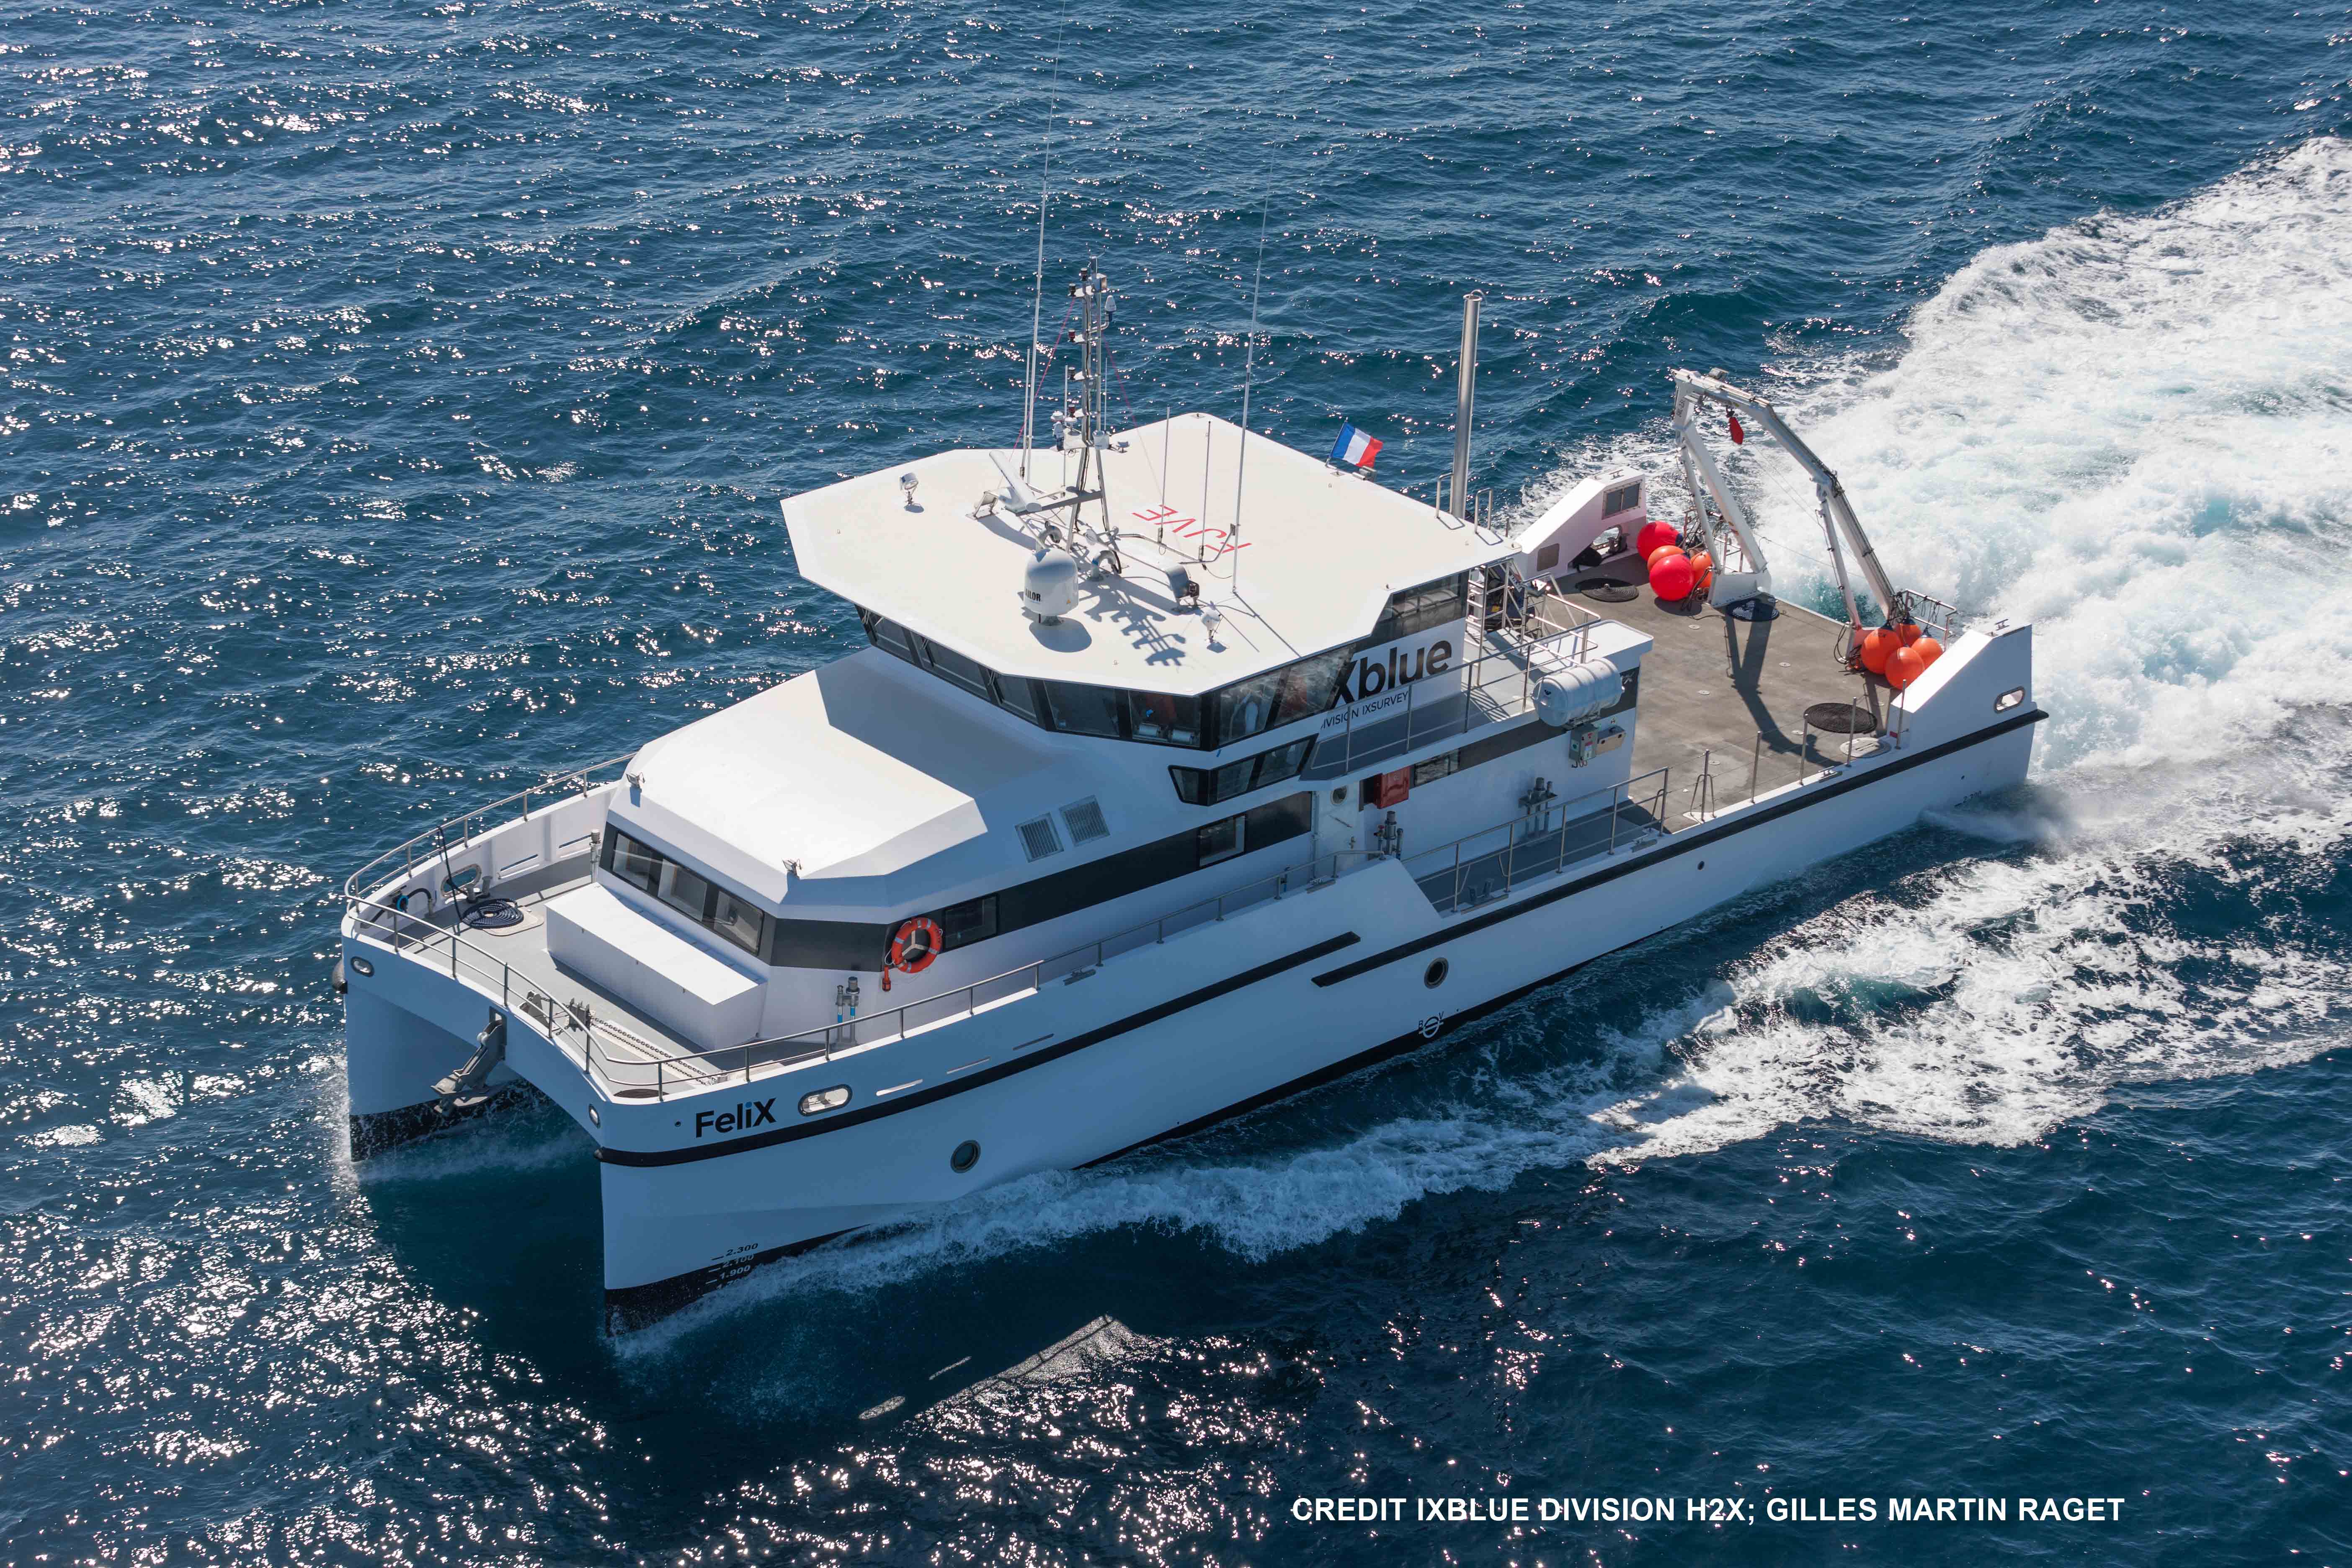 VELOX and AEC Polymers enabled the construction of FeliX, a recently-launched catamaran.